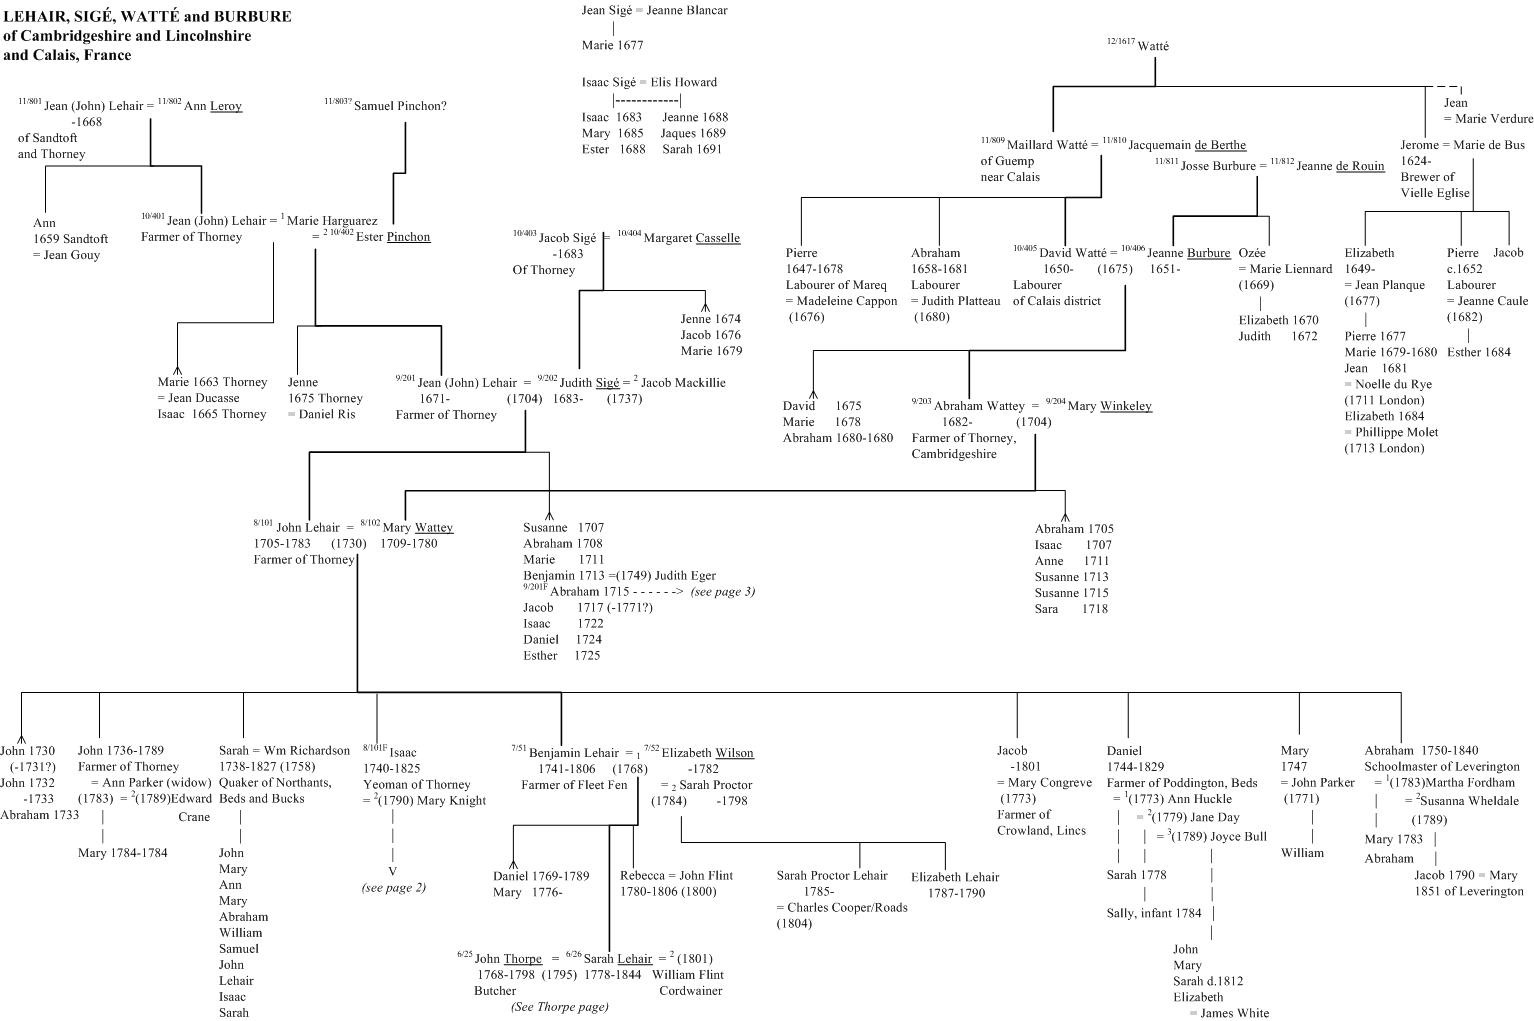 Lehair, Sige, Watte and Burbure family tree page 1